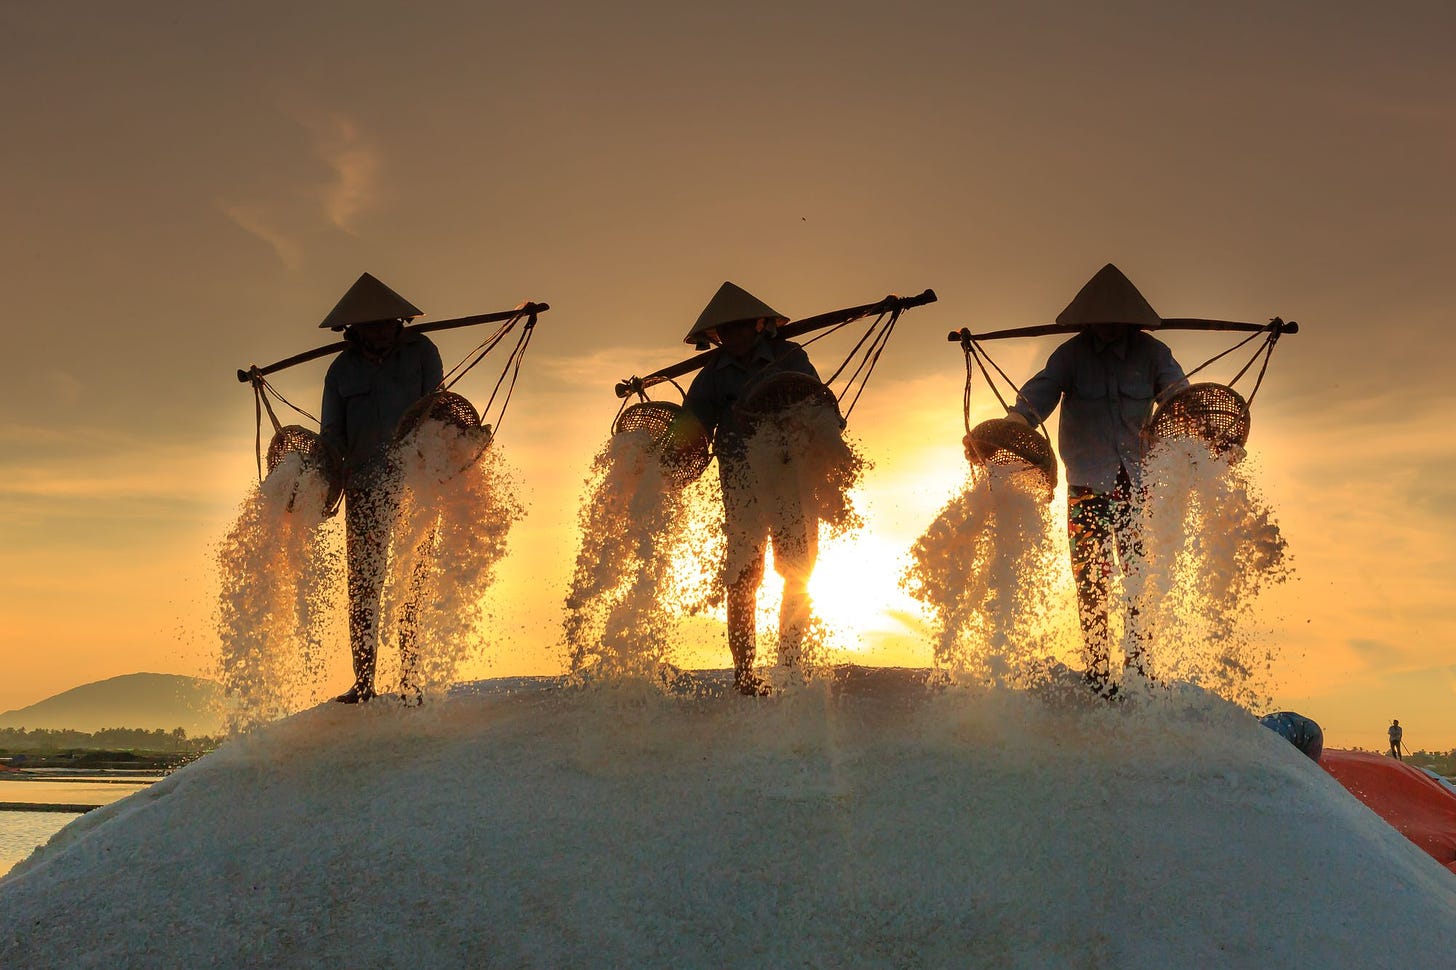 Photo of three men carrying salt at sunset by Quang Nguyen Vinh from Pexels